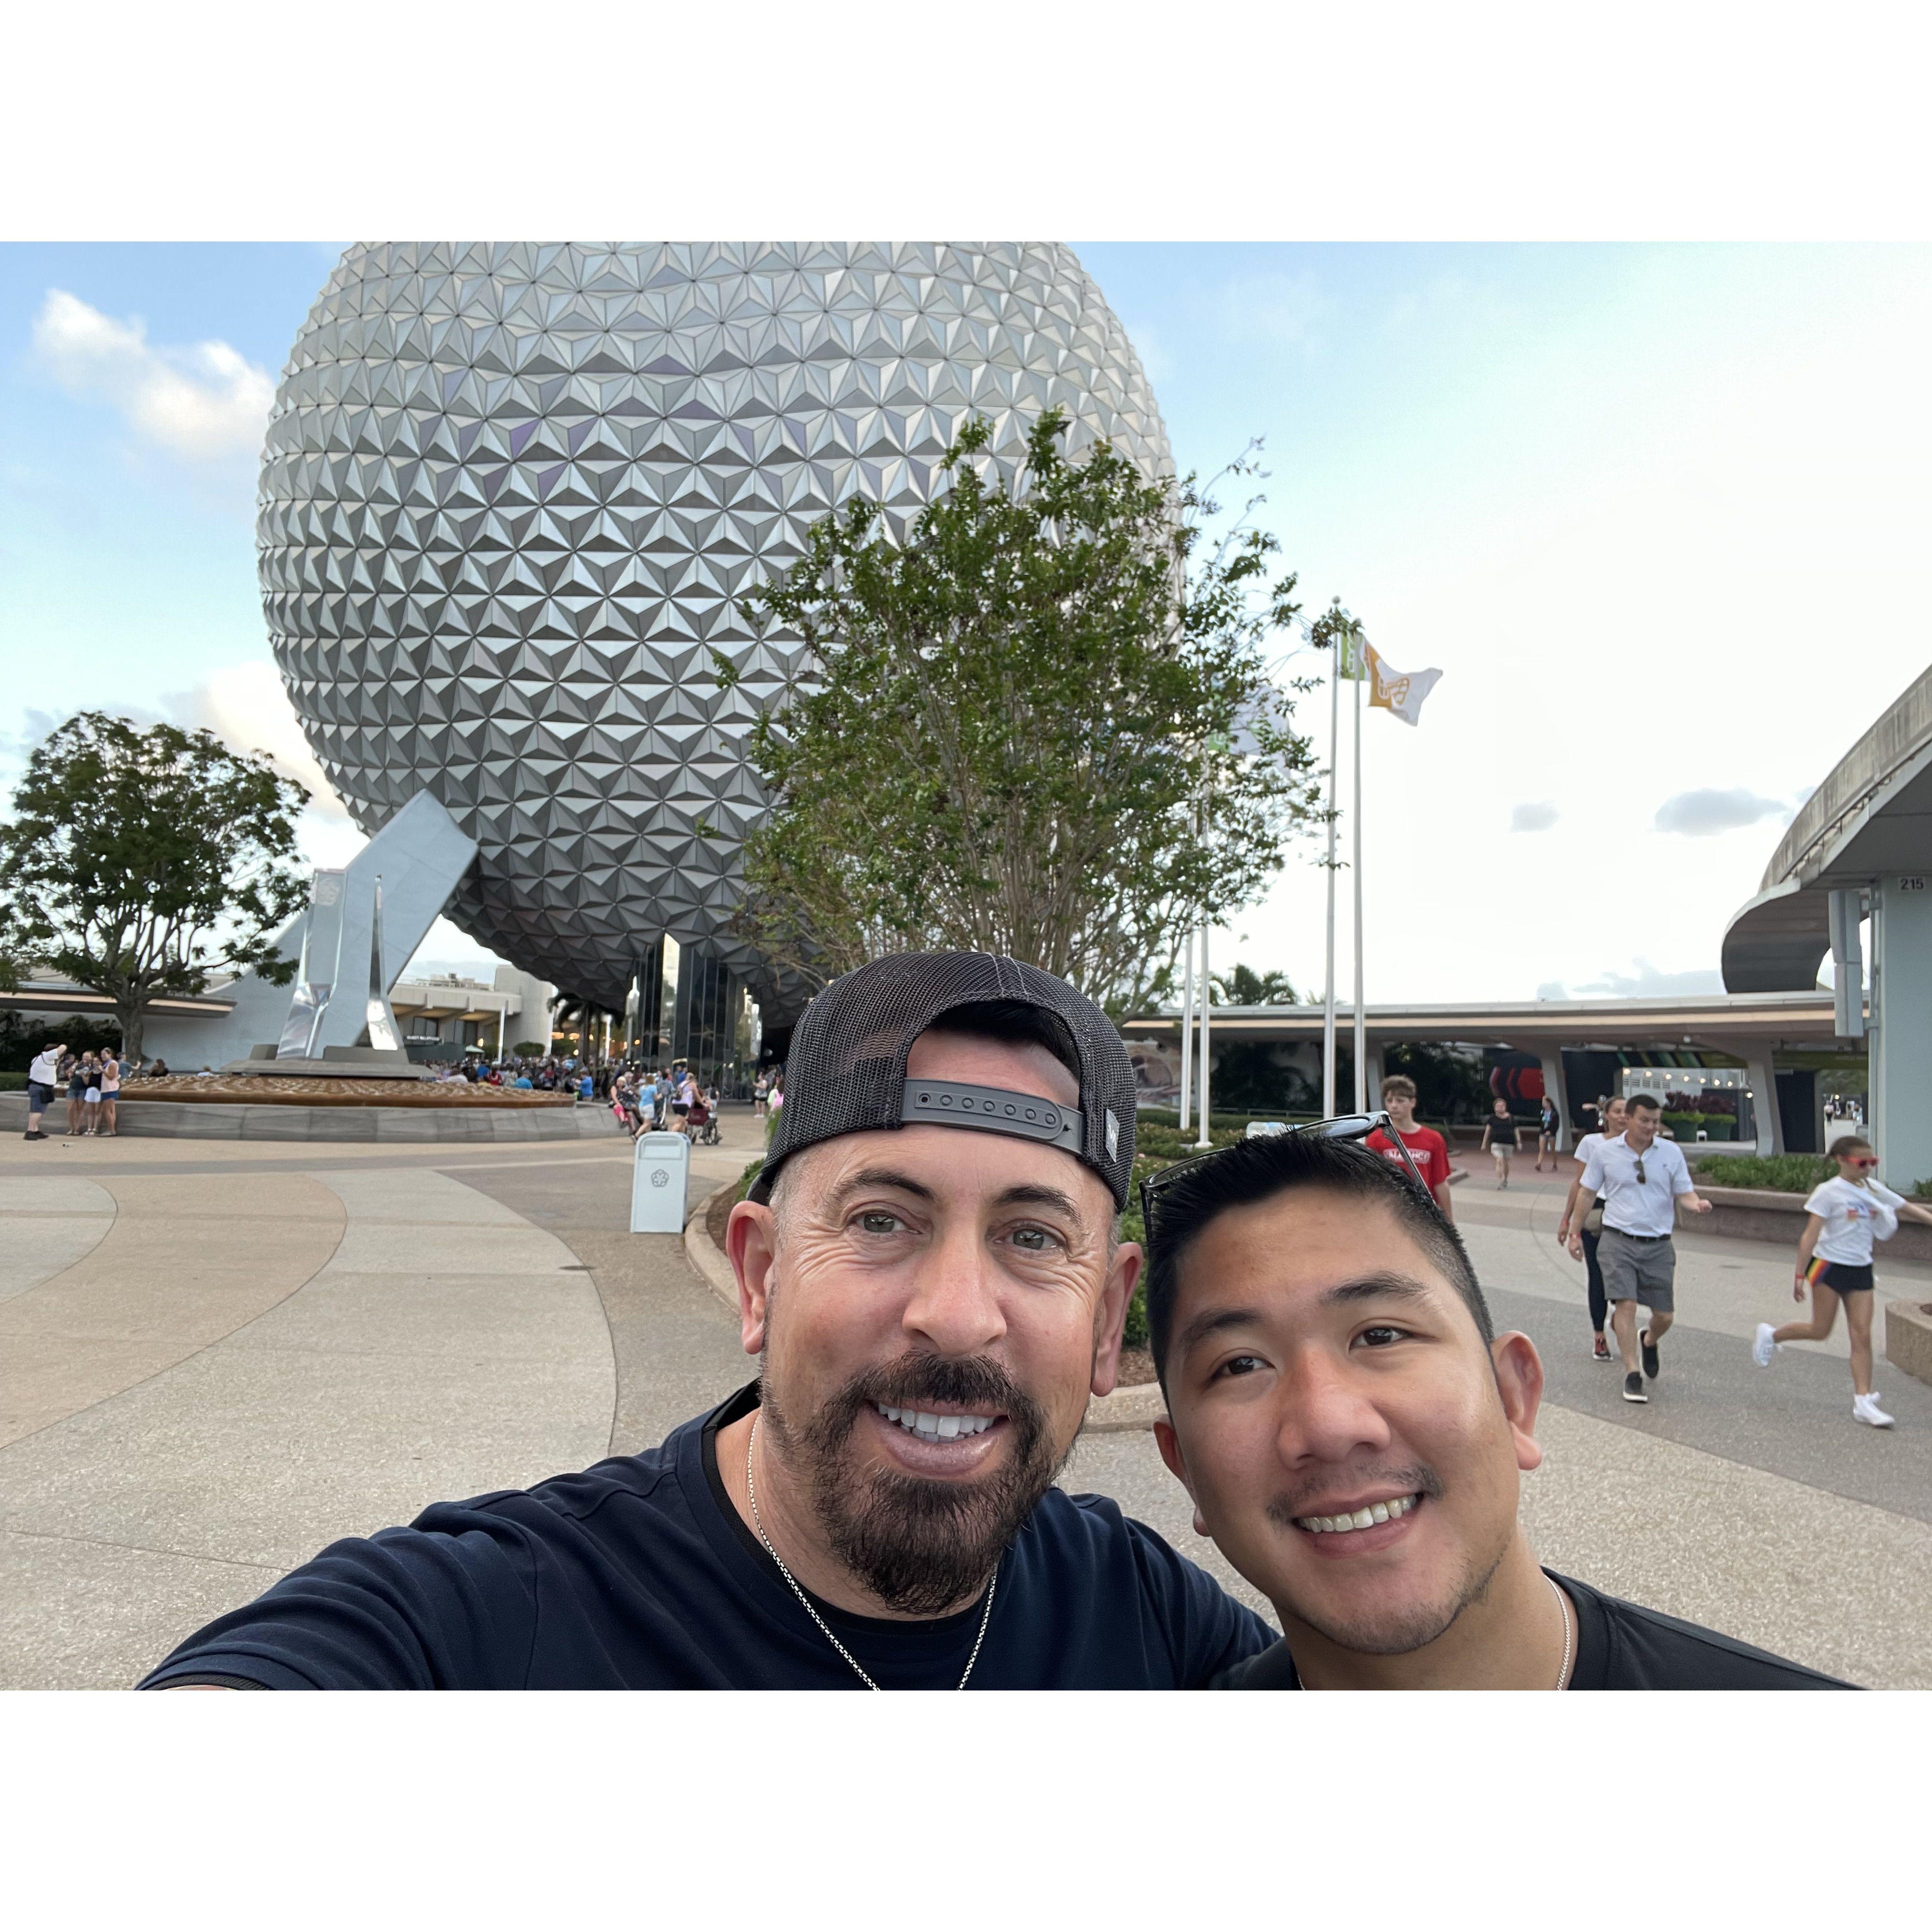 At Epcot in 2019